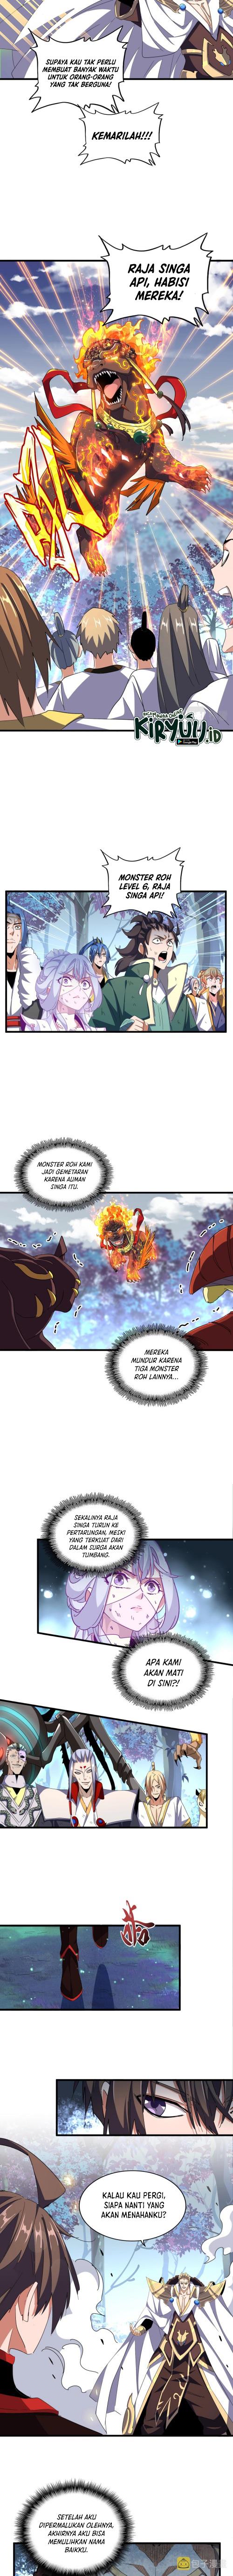 Magic Emperor Chapter 328 Image 5